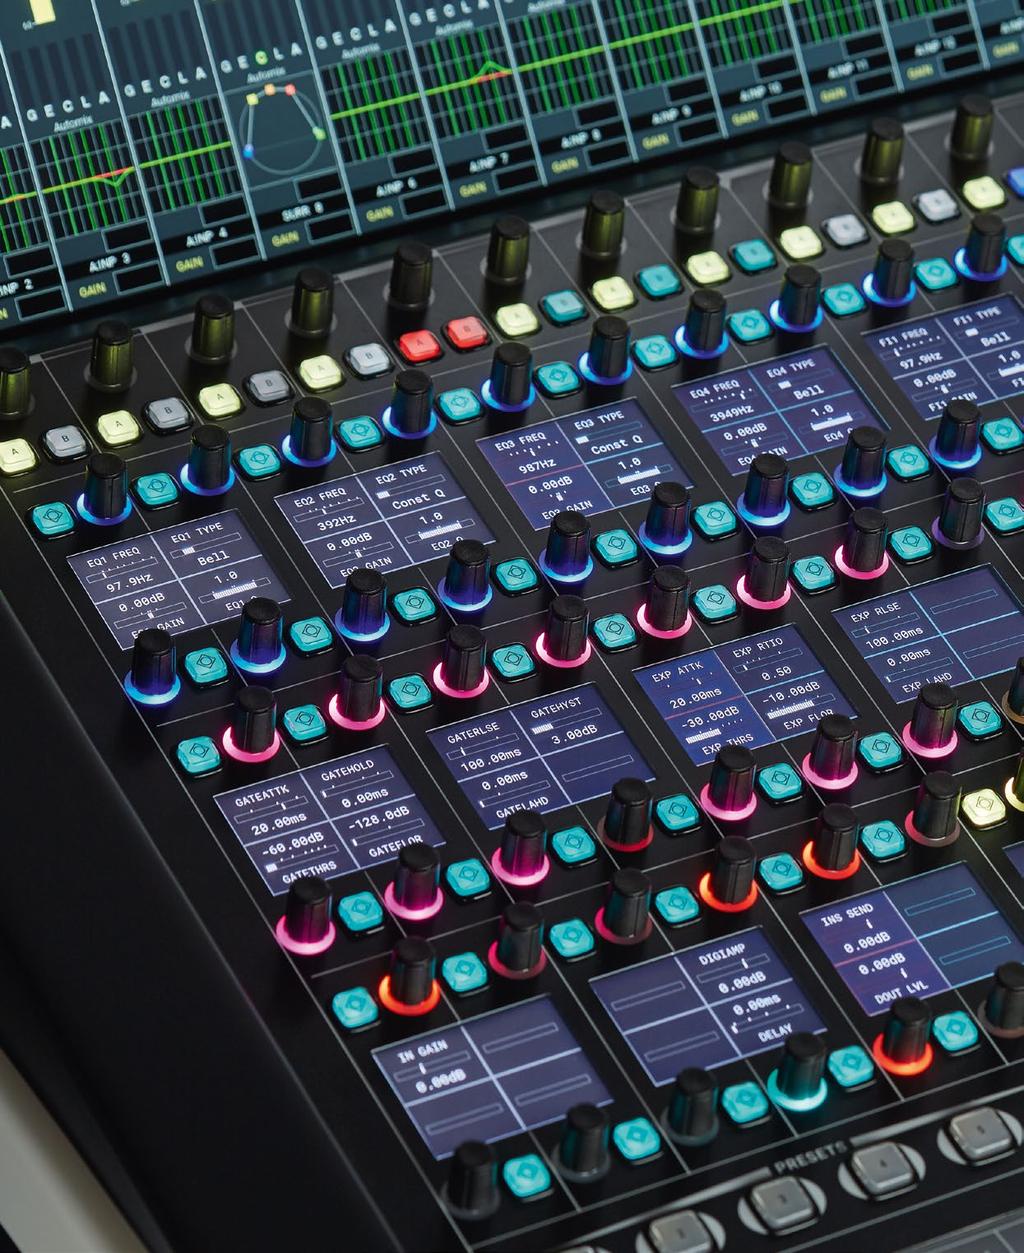 HIGHLIGHTS FADER BAYS MULTI-USER OPERATION In multi-user mode, 96 rotary encoders in each 16-fader bay give direct access to all parameters to create an additional central control panel.